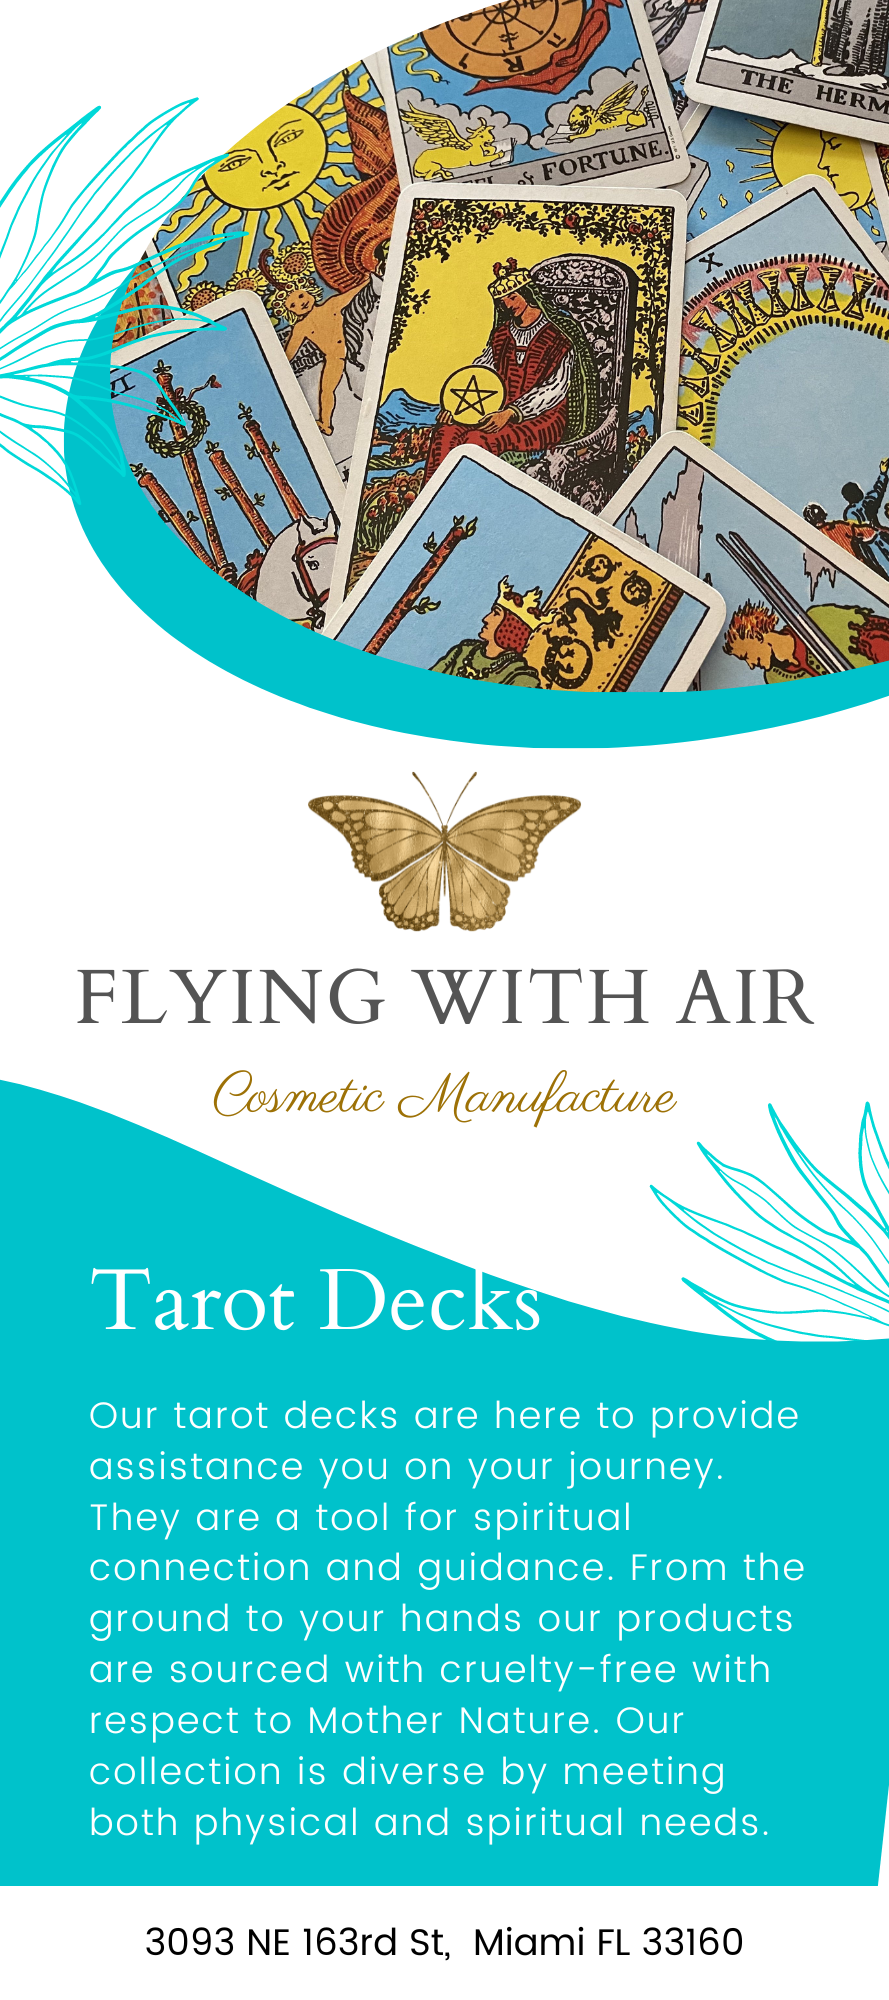 Flying with Air Rack Card Set of 10 - Tarot